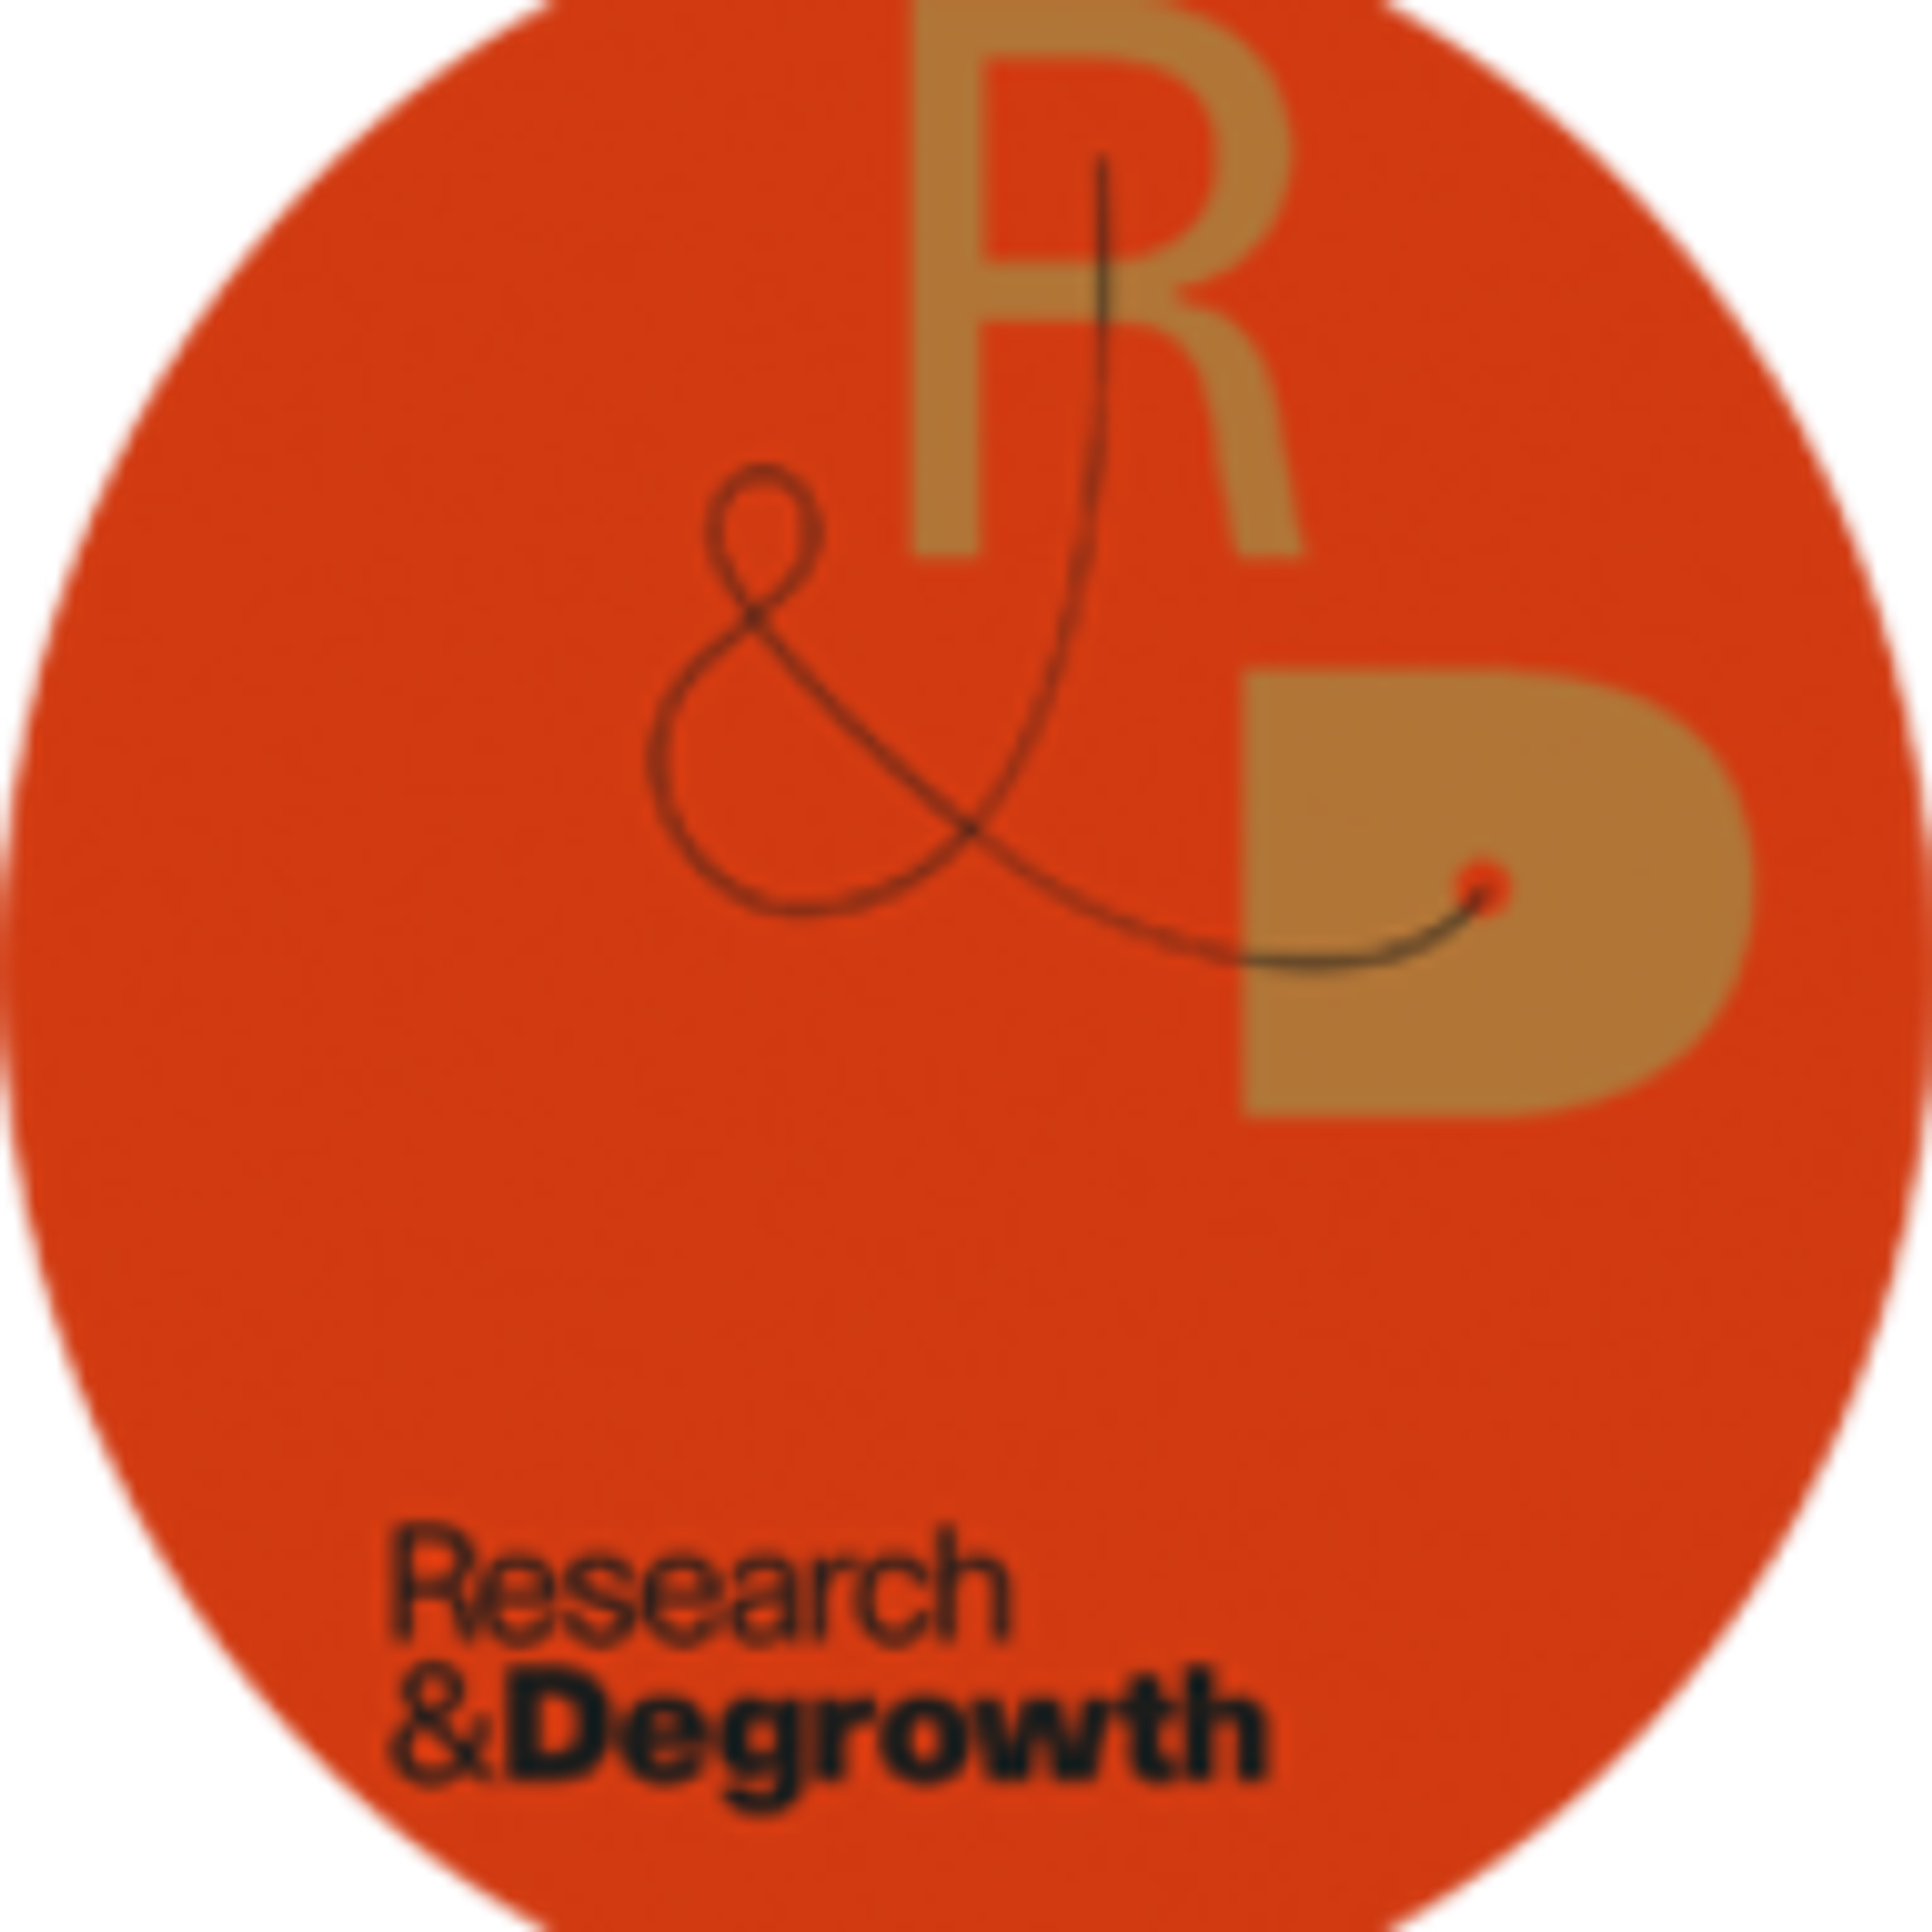 Research and Degrowth (R&D) - An academic association dedicated to research, training, awareness raising and events organization around degrowth